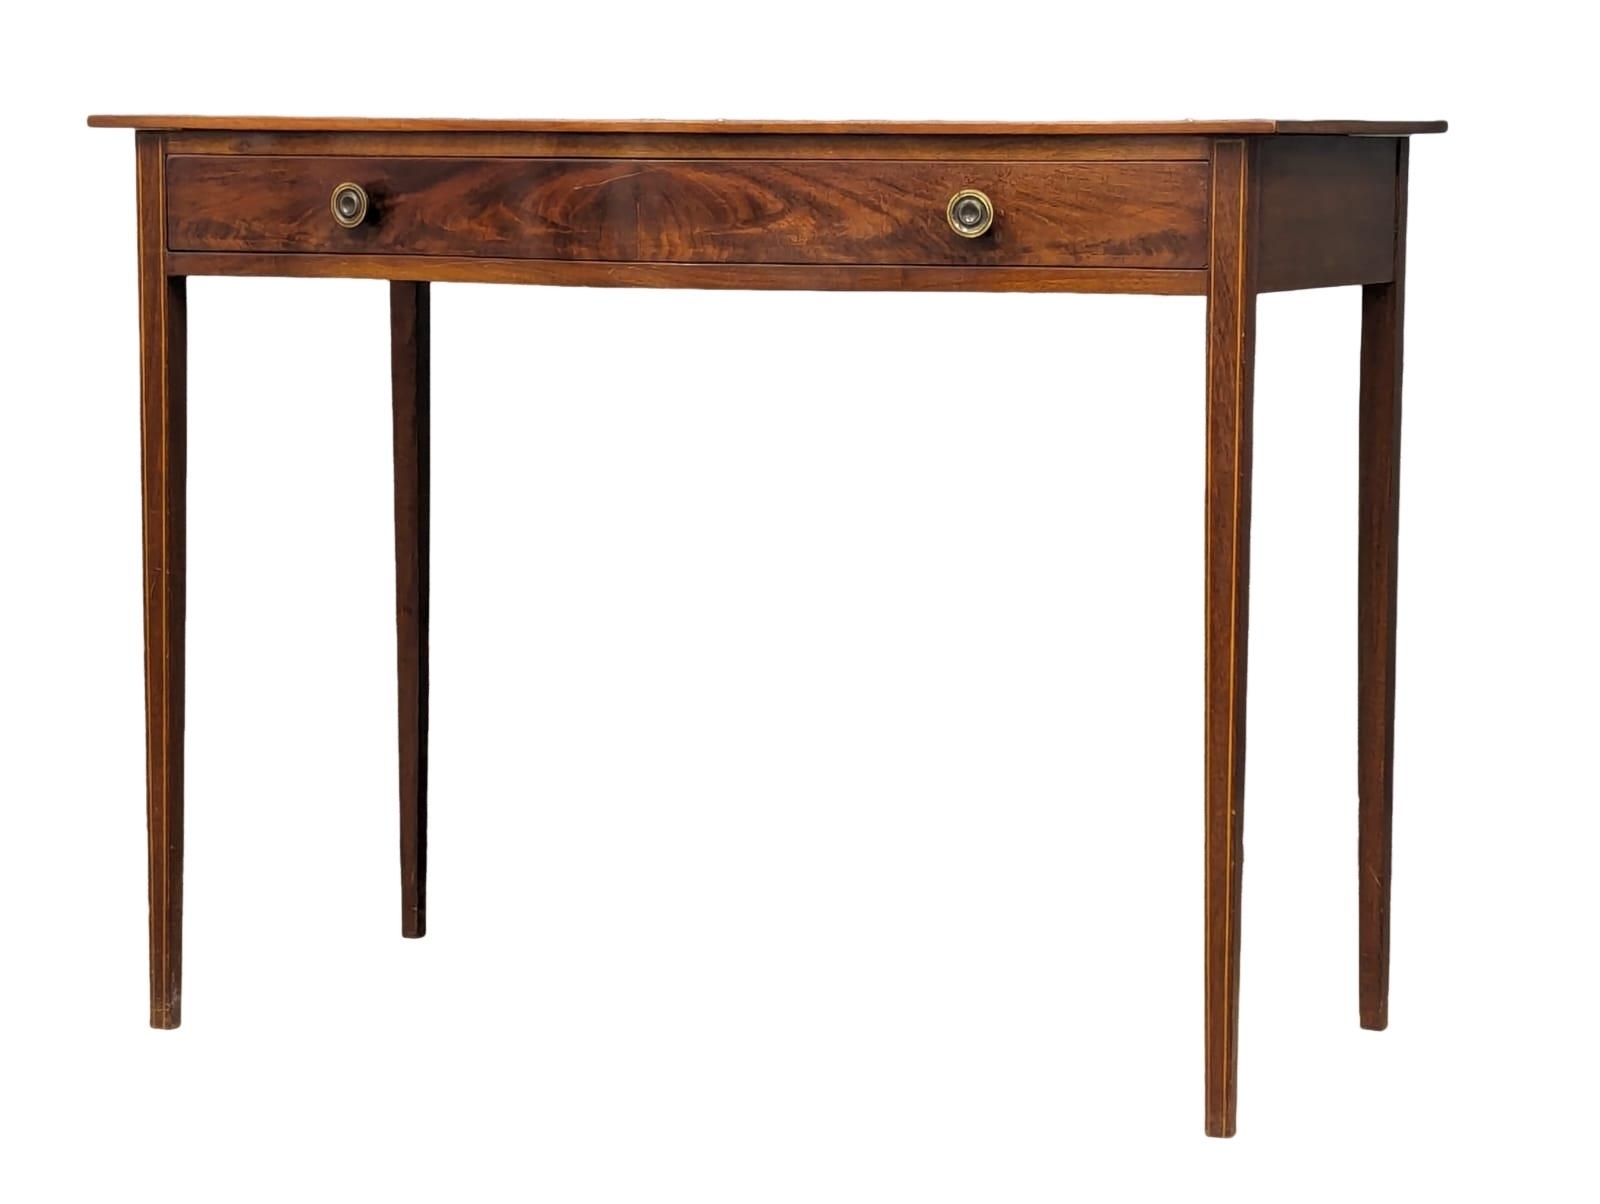 An Early 20th Century Sheraton Revival inlaid mahogany side table on square tapering legs and - Image 2 of 6